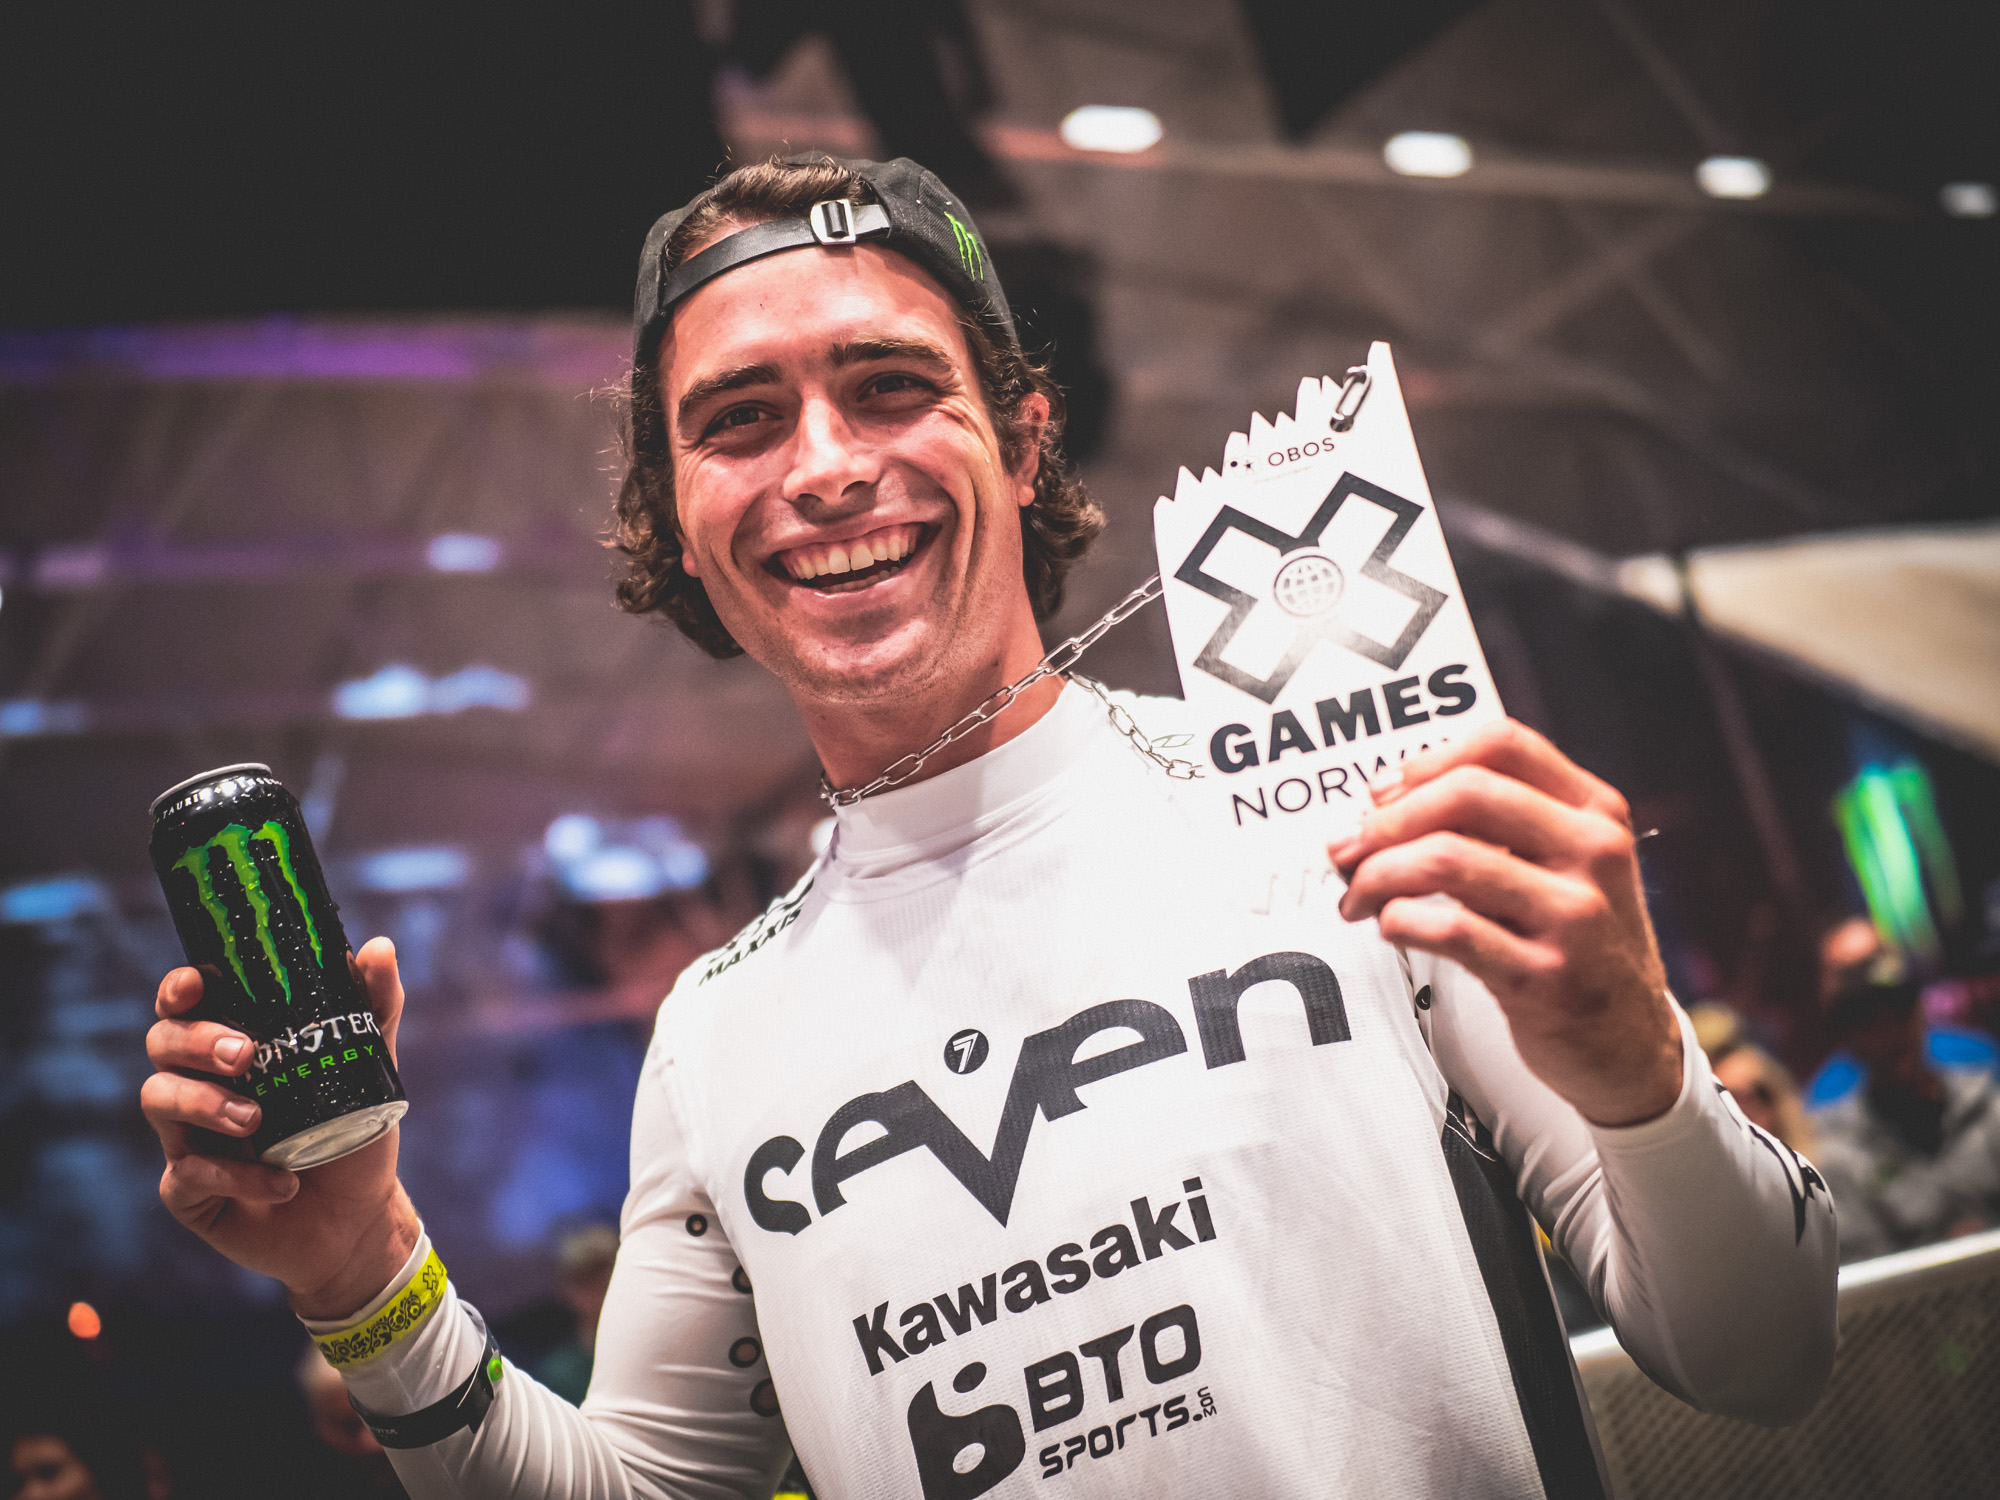 Monster Energy's Axell Hodges Returns from Injury with Silver Medal in Moto X QuarterPipe High Air at X Games Norway 2019